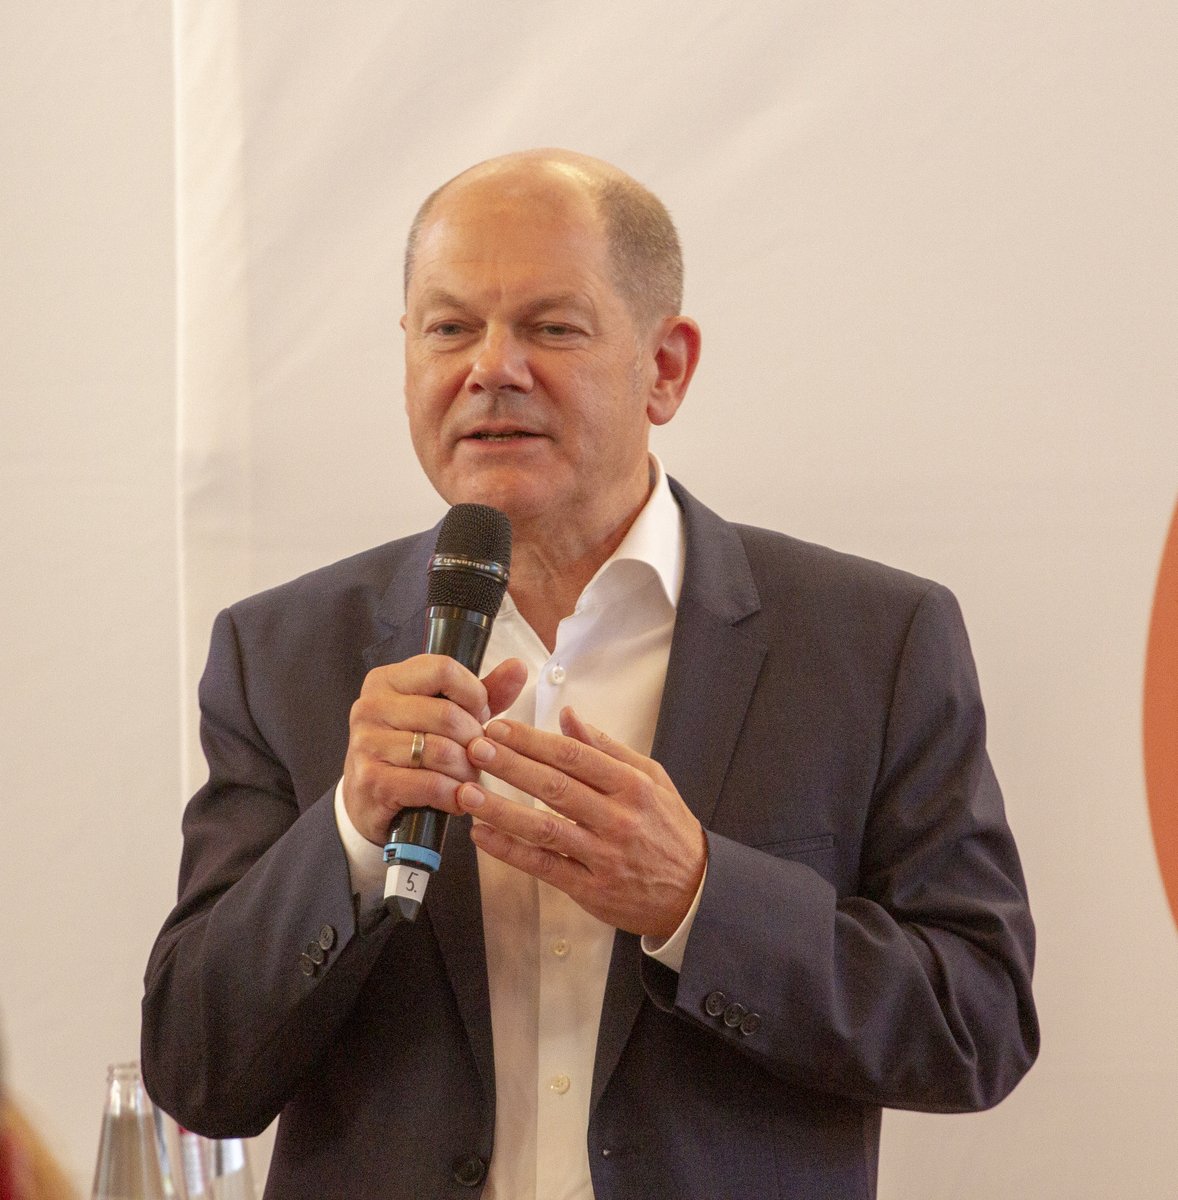 Of course the SPD, the centre-left coalition partner of the CDU/CSU and traditionally one of Germany’s major political parties, will also seek the highest office in the land. The party nominated Olaf Scholz, current Vice-chancellor and Minister of Finance, ...